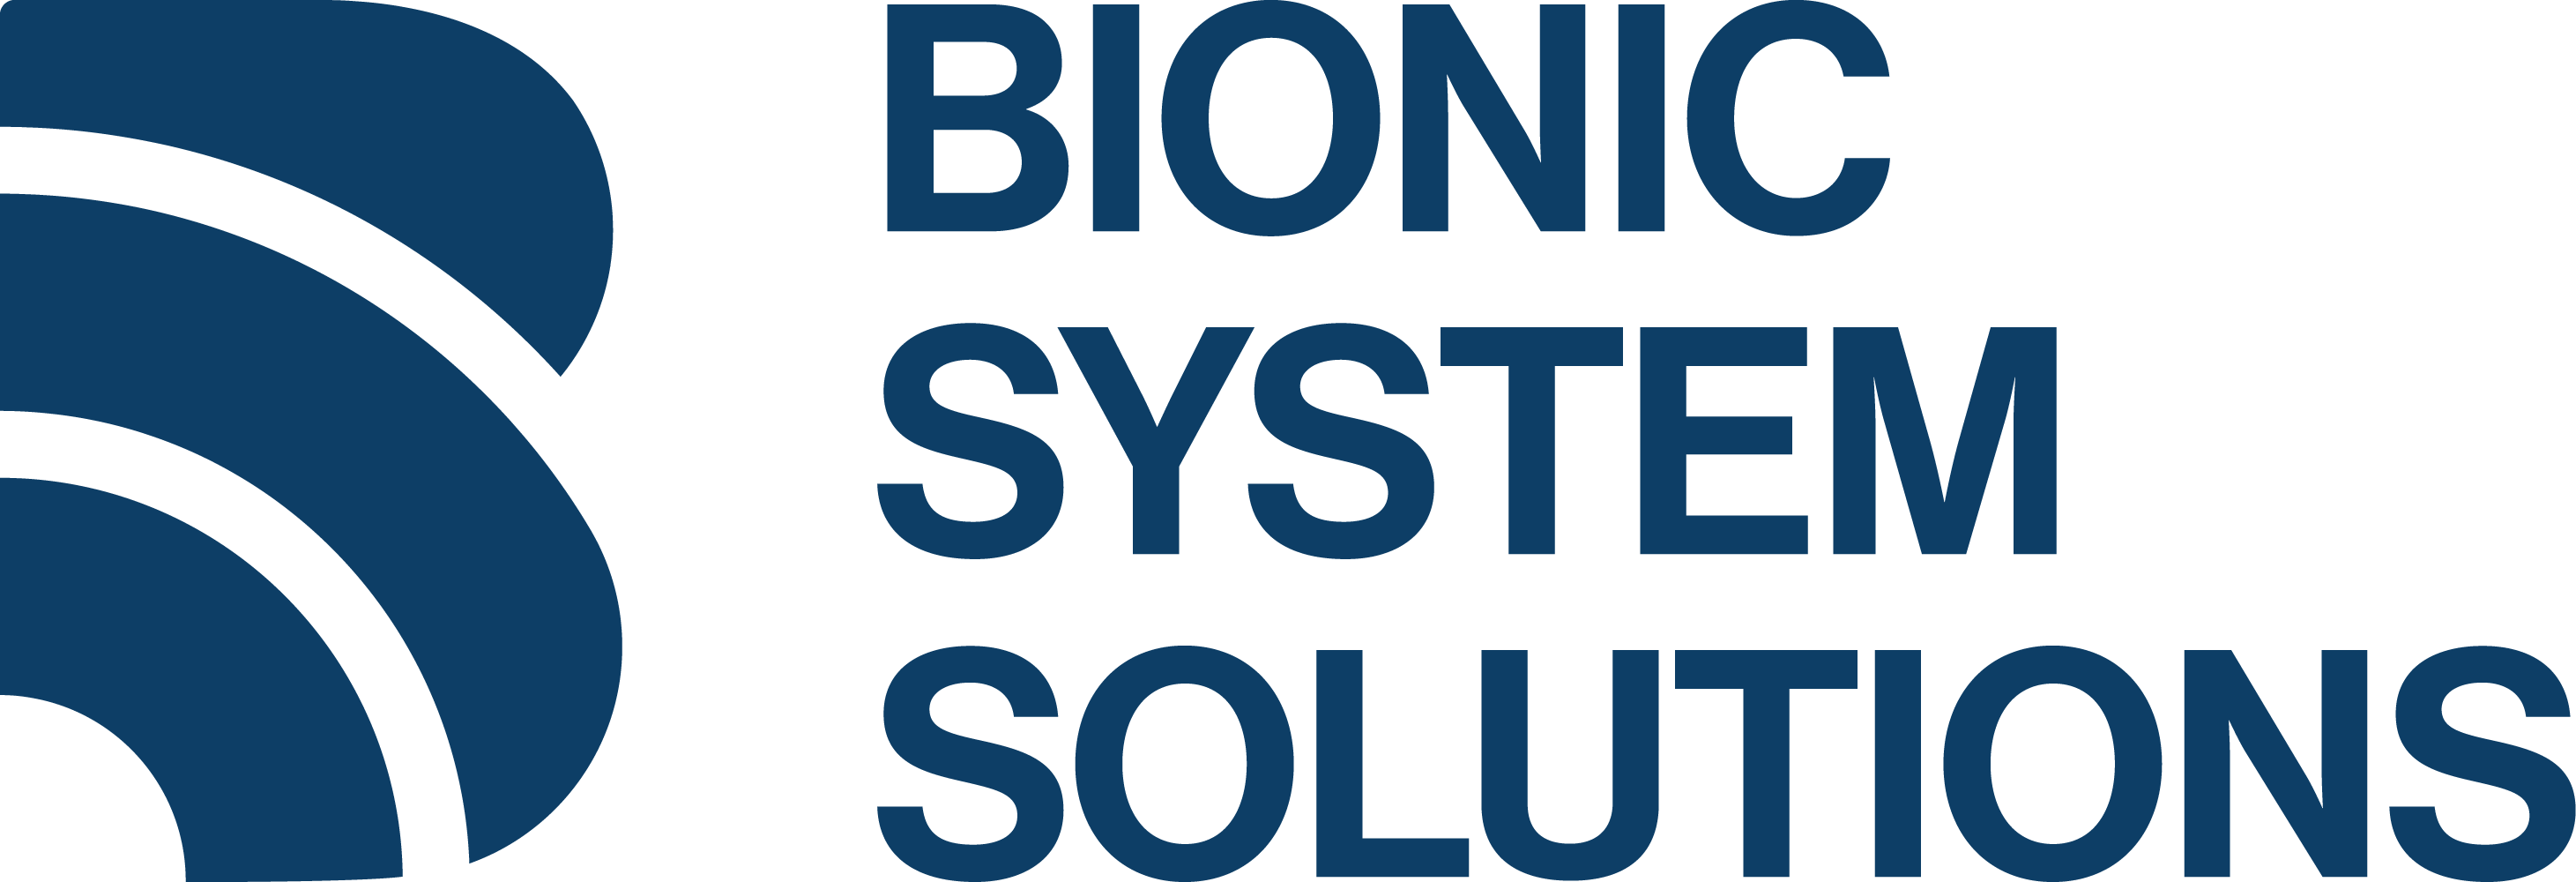 Bionic System Solutions